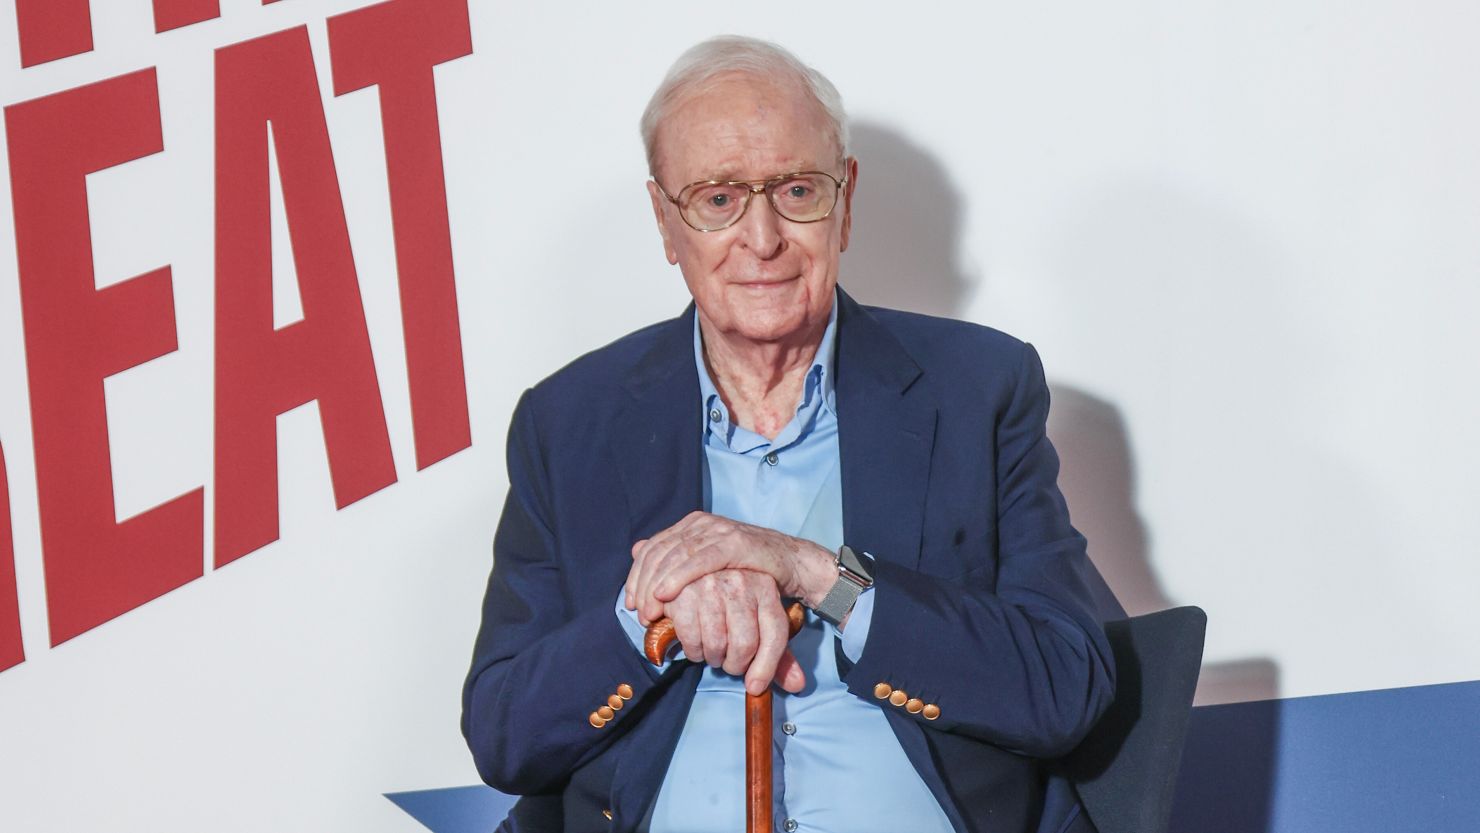 Michael Caine's acting career spans 160 movies over eight decades.